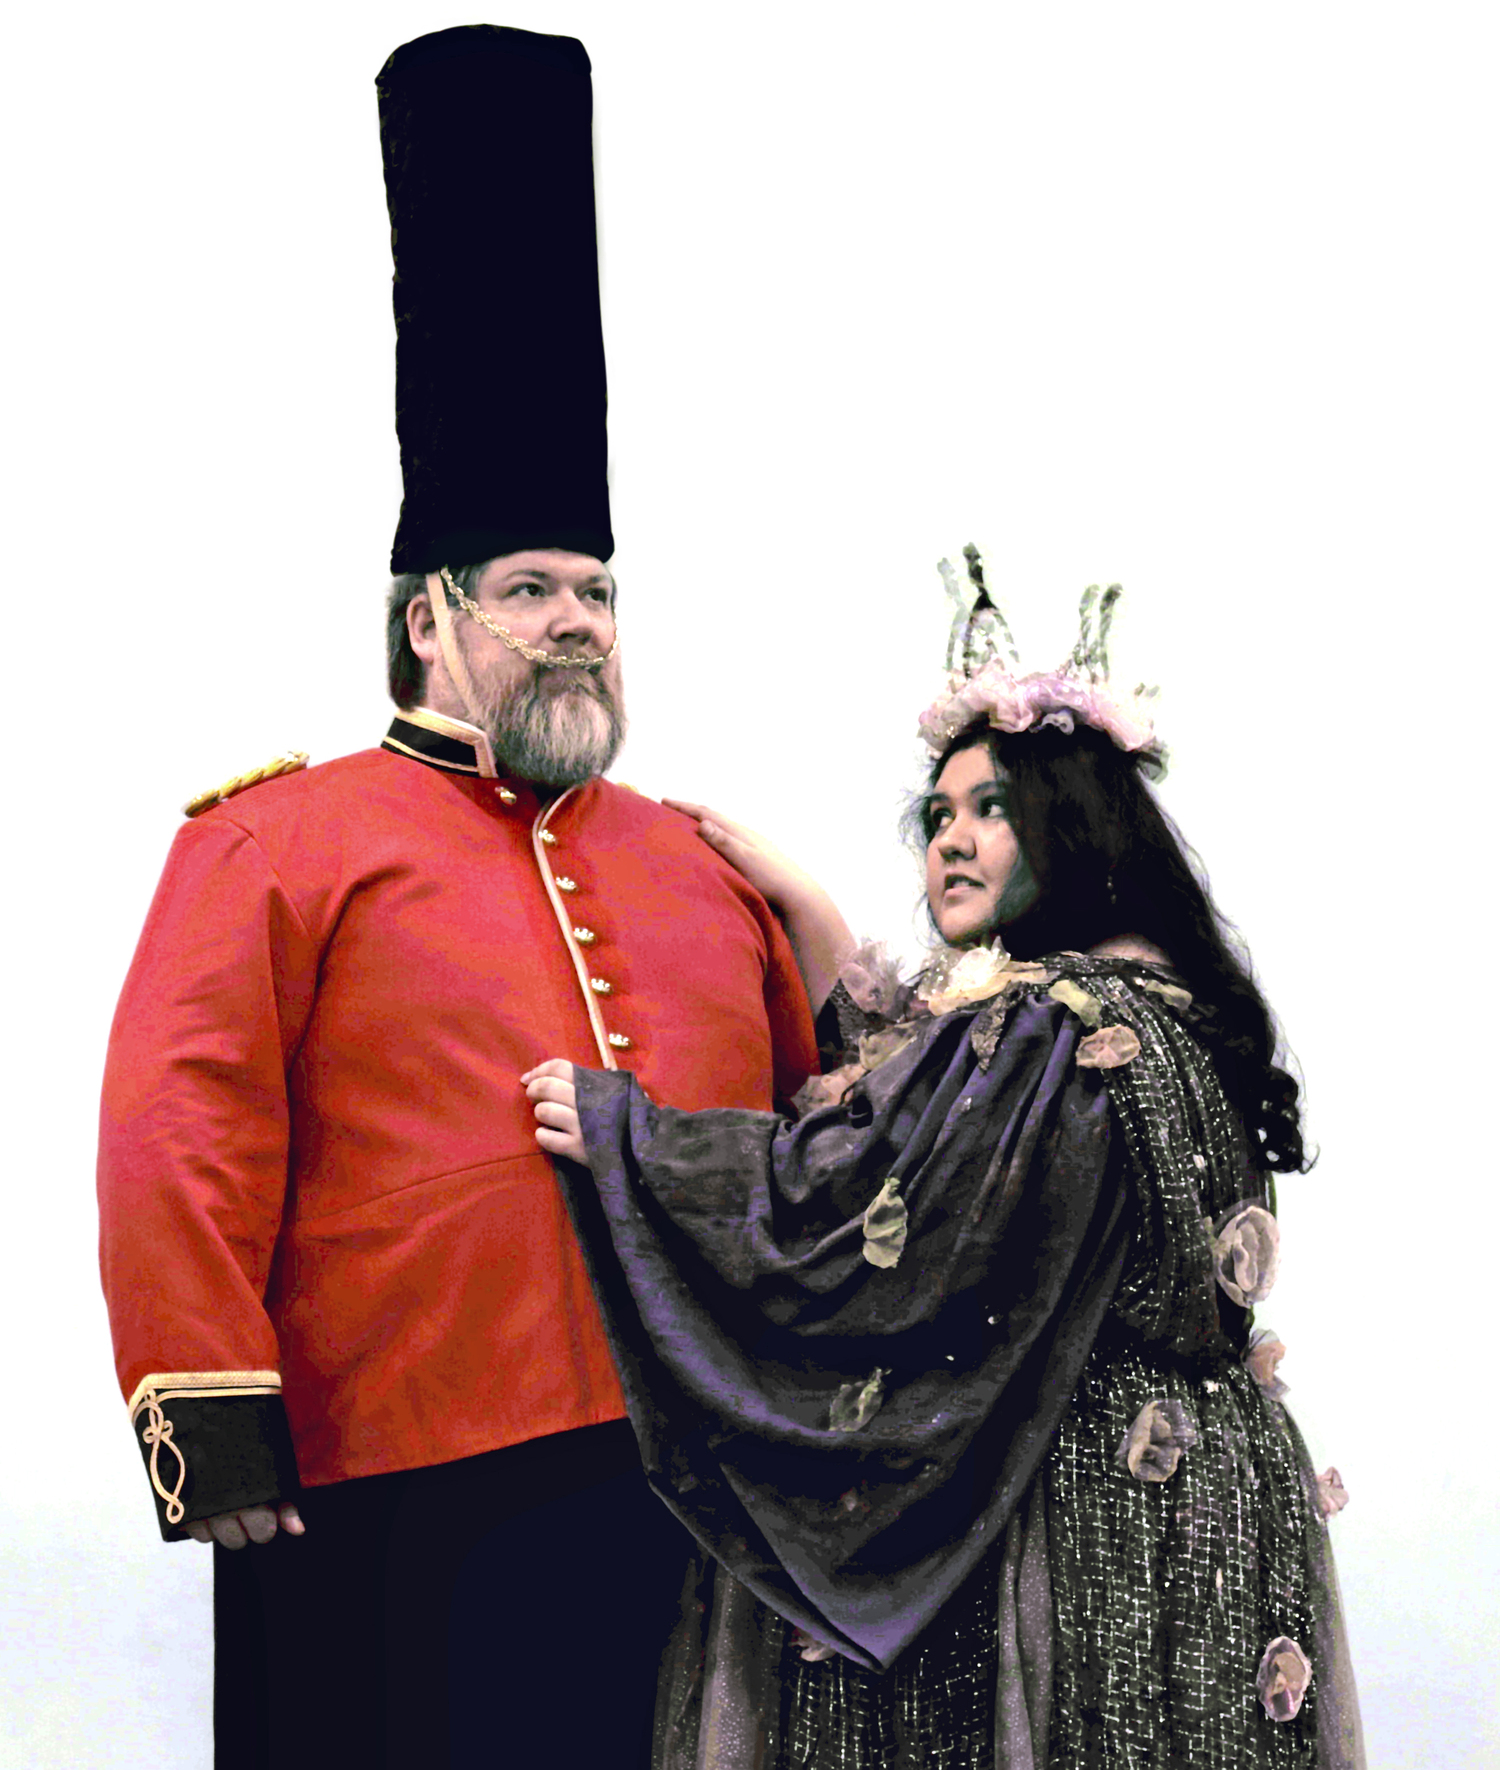 Private Willis (Ben Salers) and the Fairy Queen (Delaney R. Page) in a scene from 